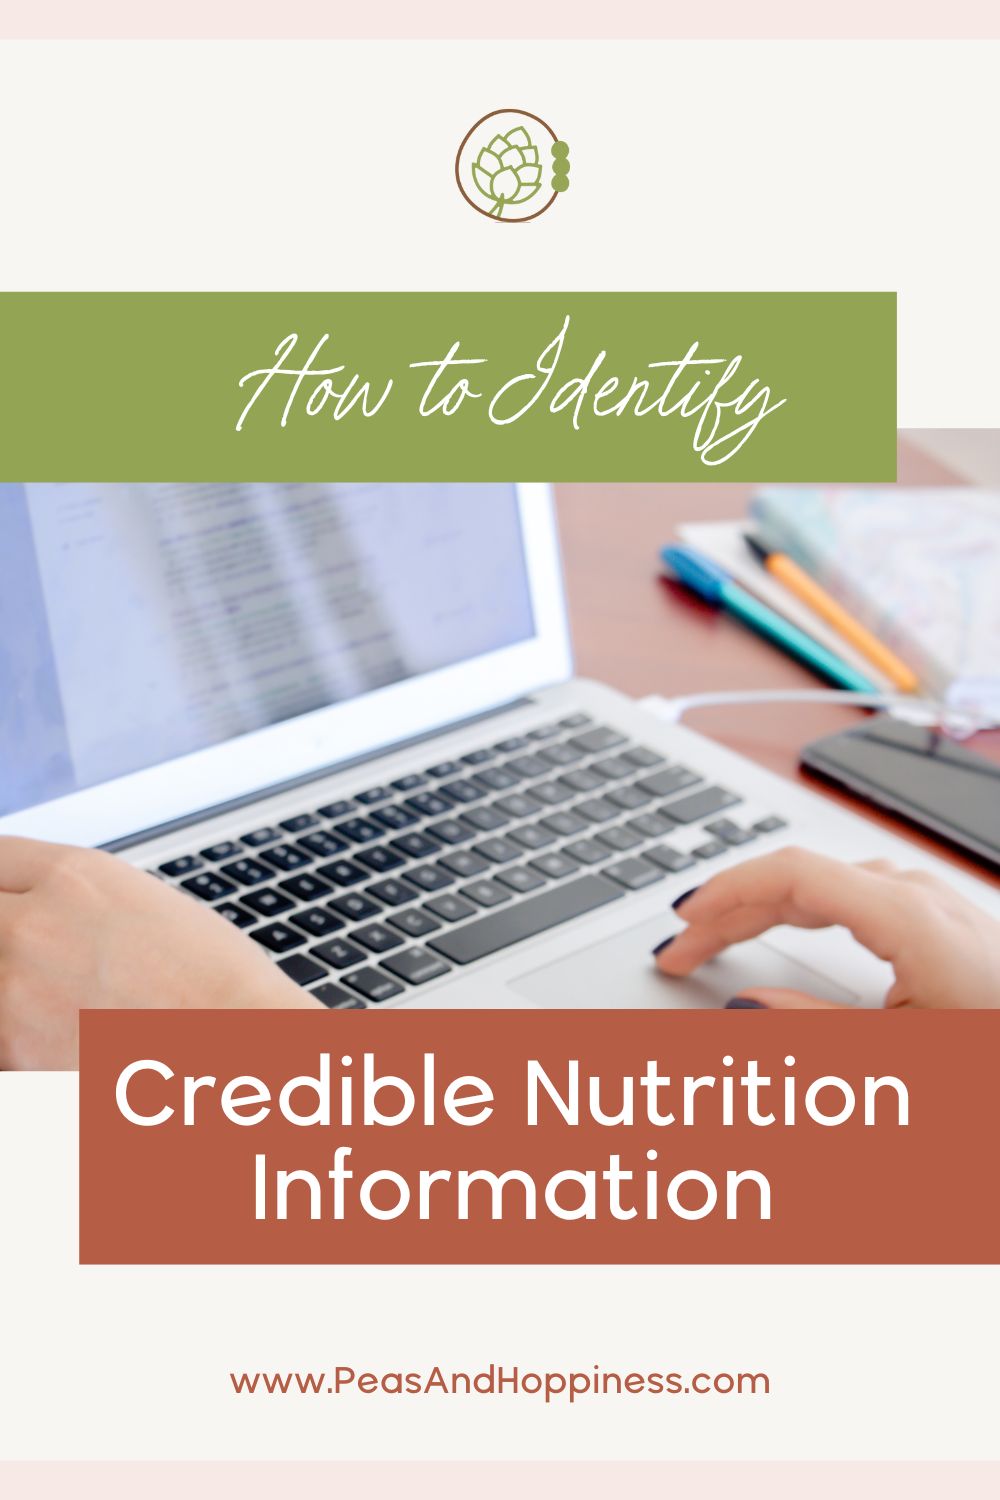 How to Identify Credible Nutrition Information Online